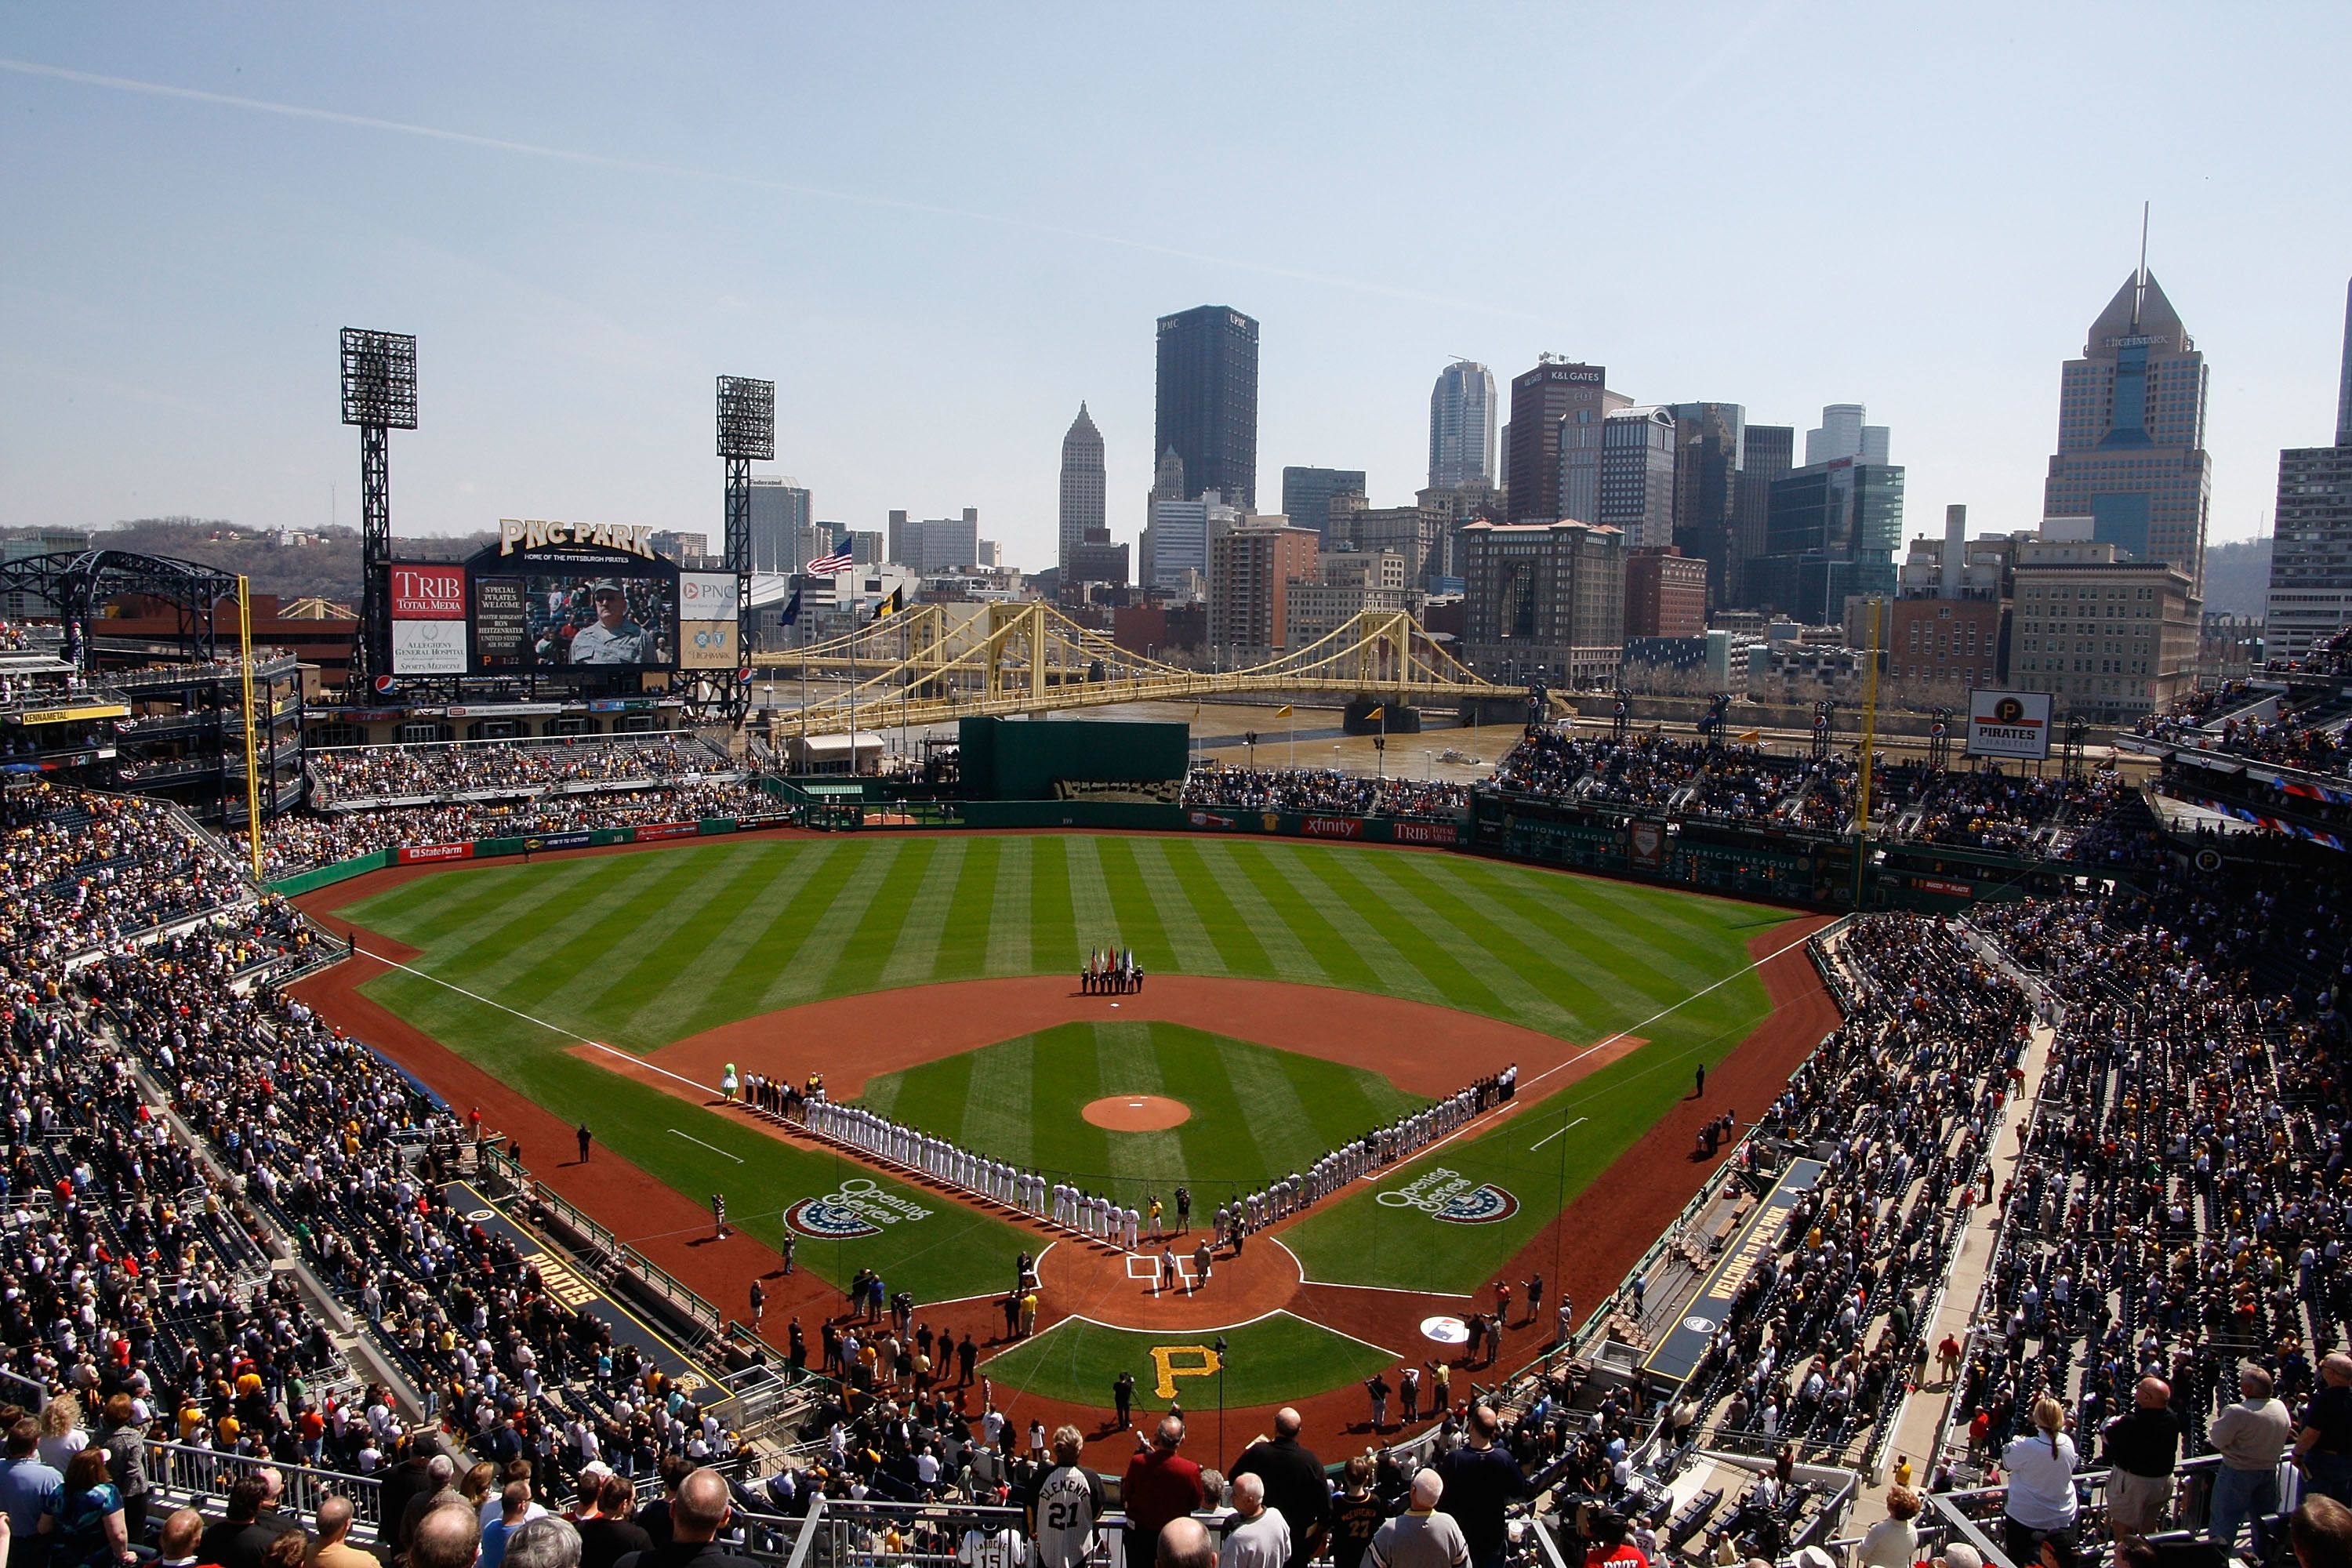 3000x2000 Pittsburgh Wallpaper for PC | Full HD Pictures - HD Wallpapers